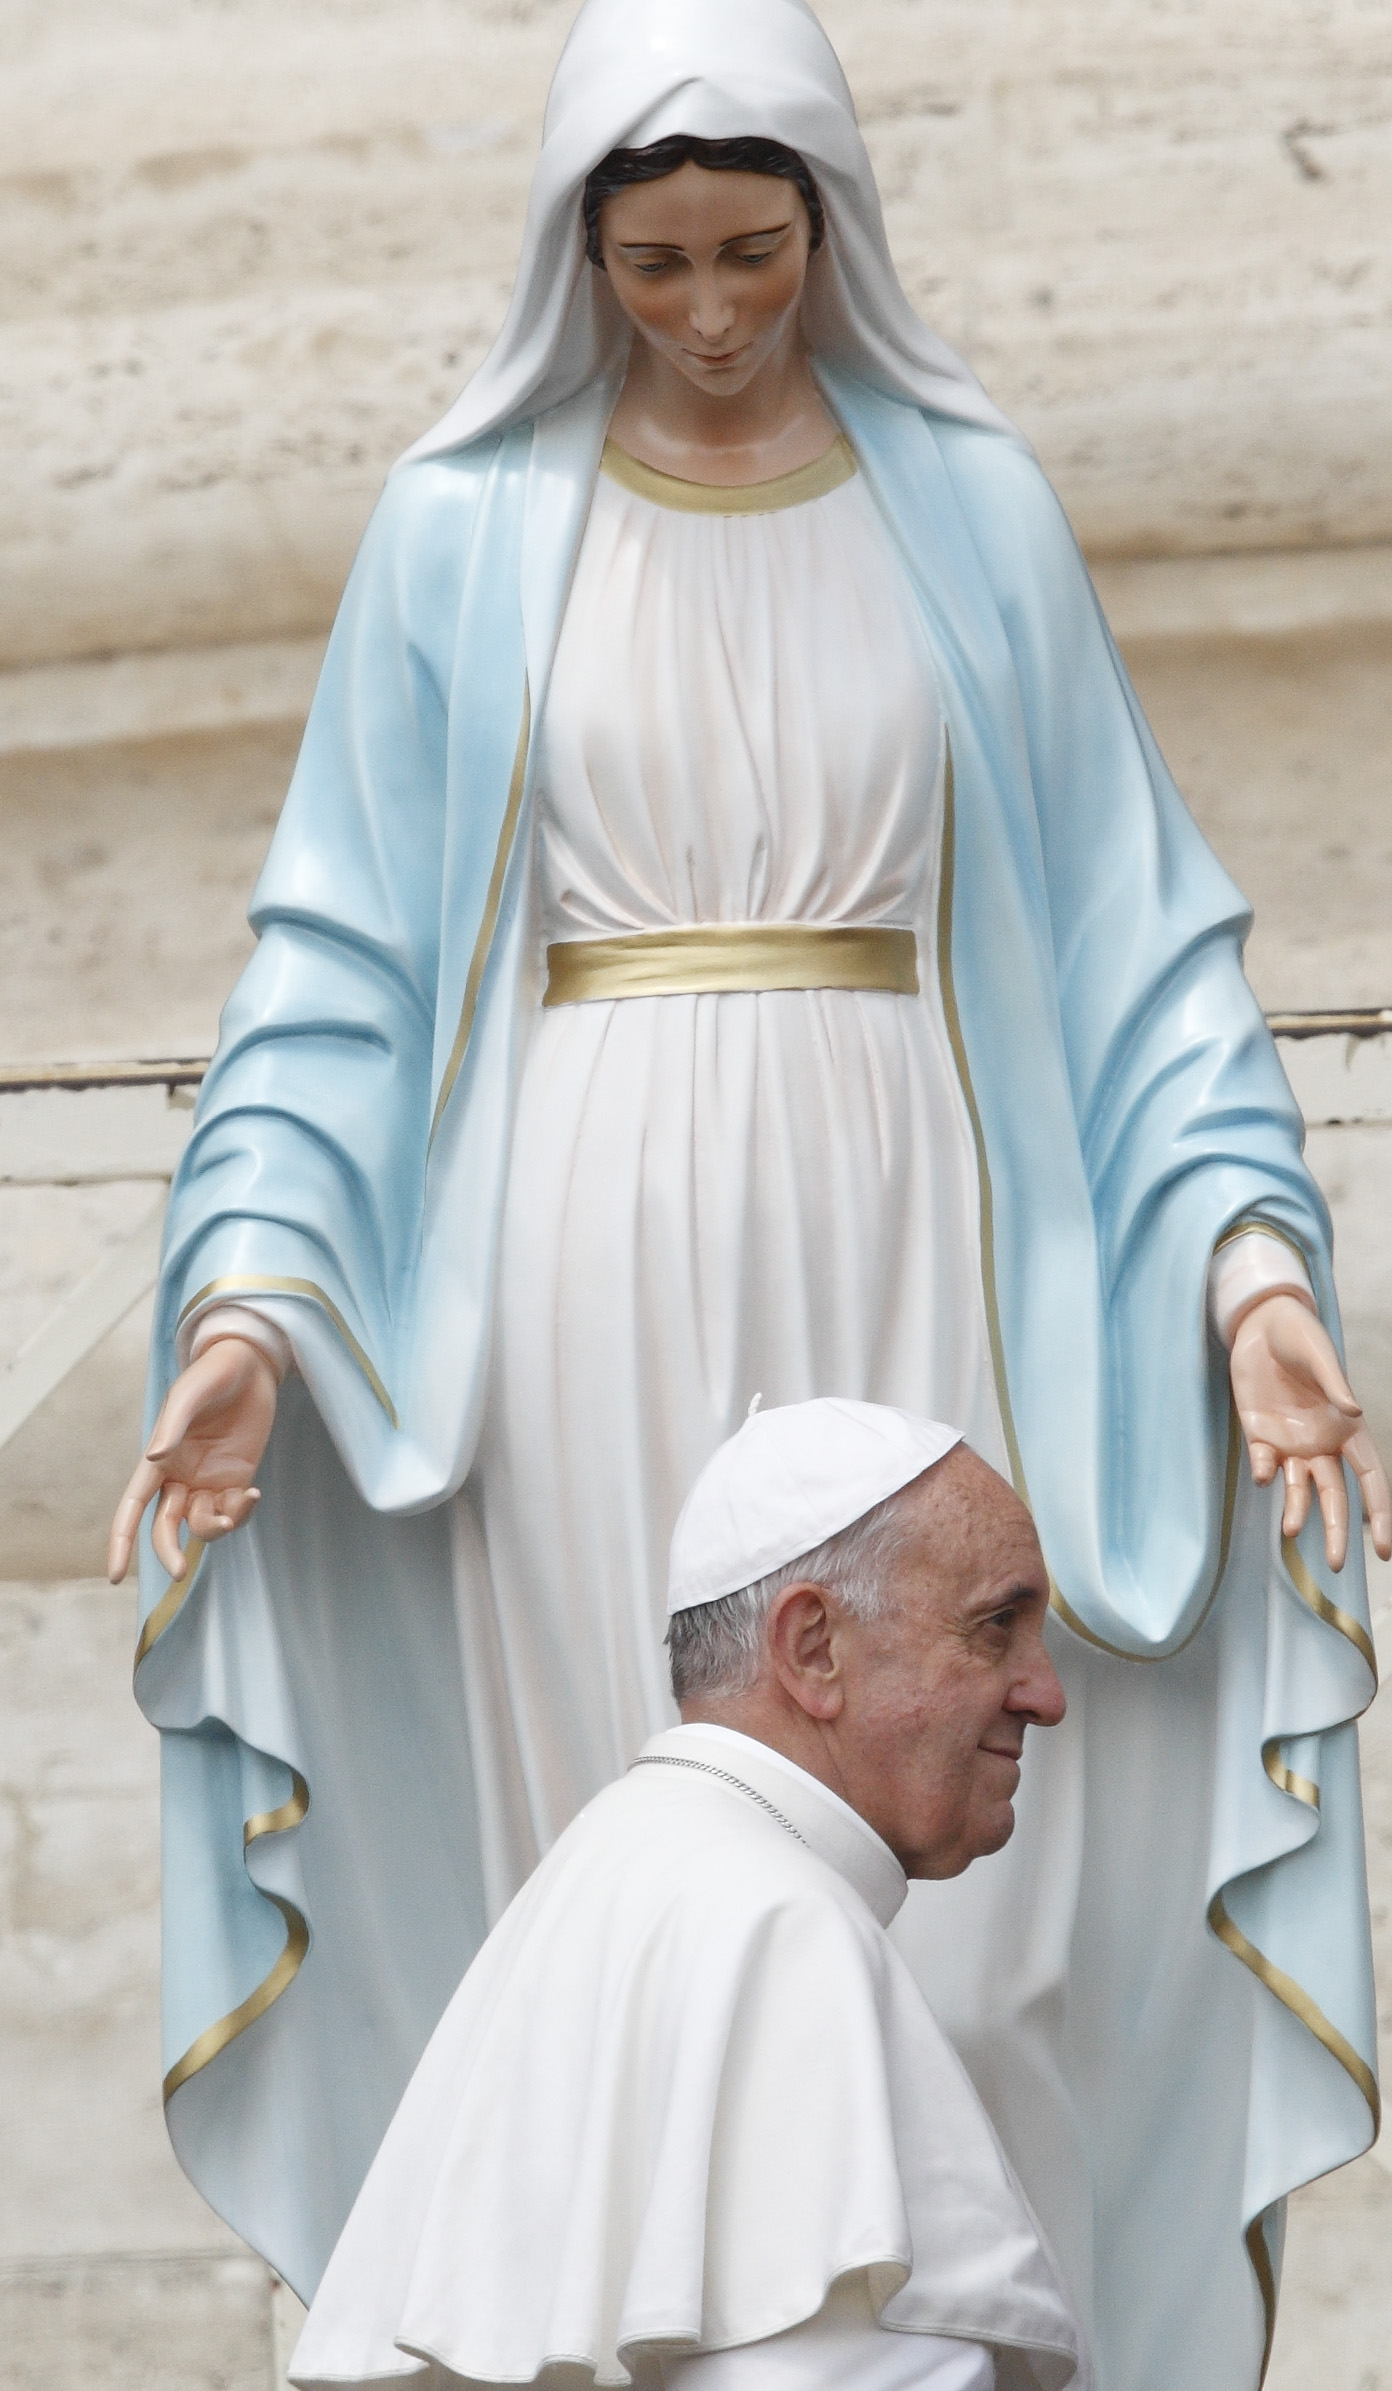  Pope Francis walks past a statue of Mary after praying in front of it during his general audience in St. Peter's Square at the Vatican, May 29, 2013. (CNS photo/Paul Haring)